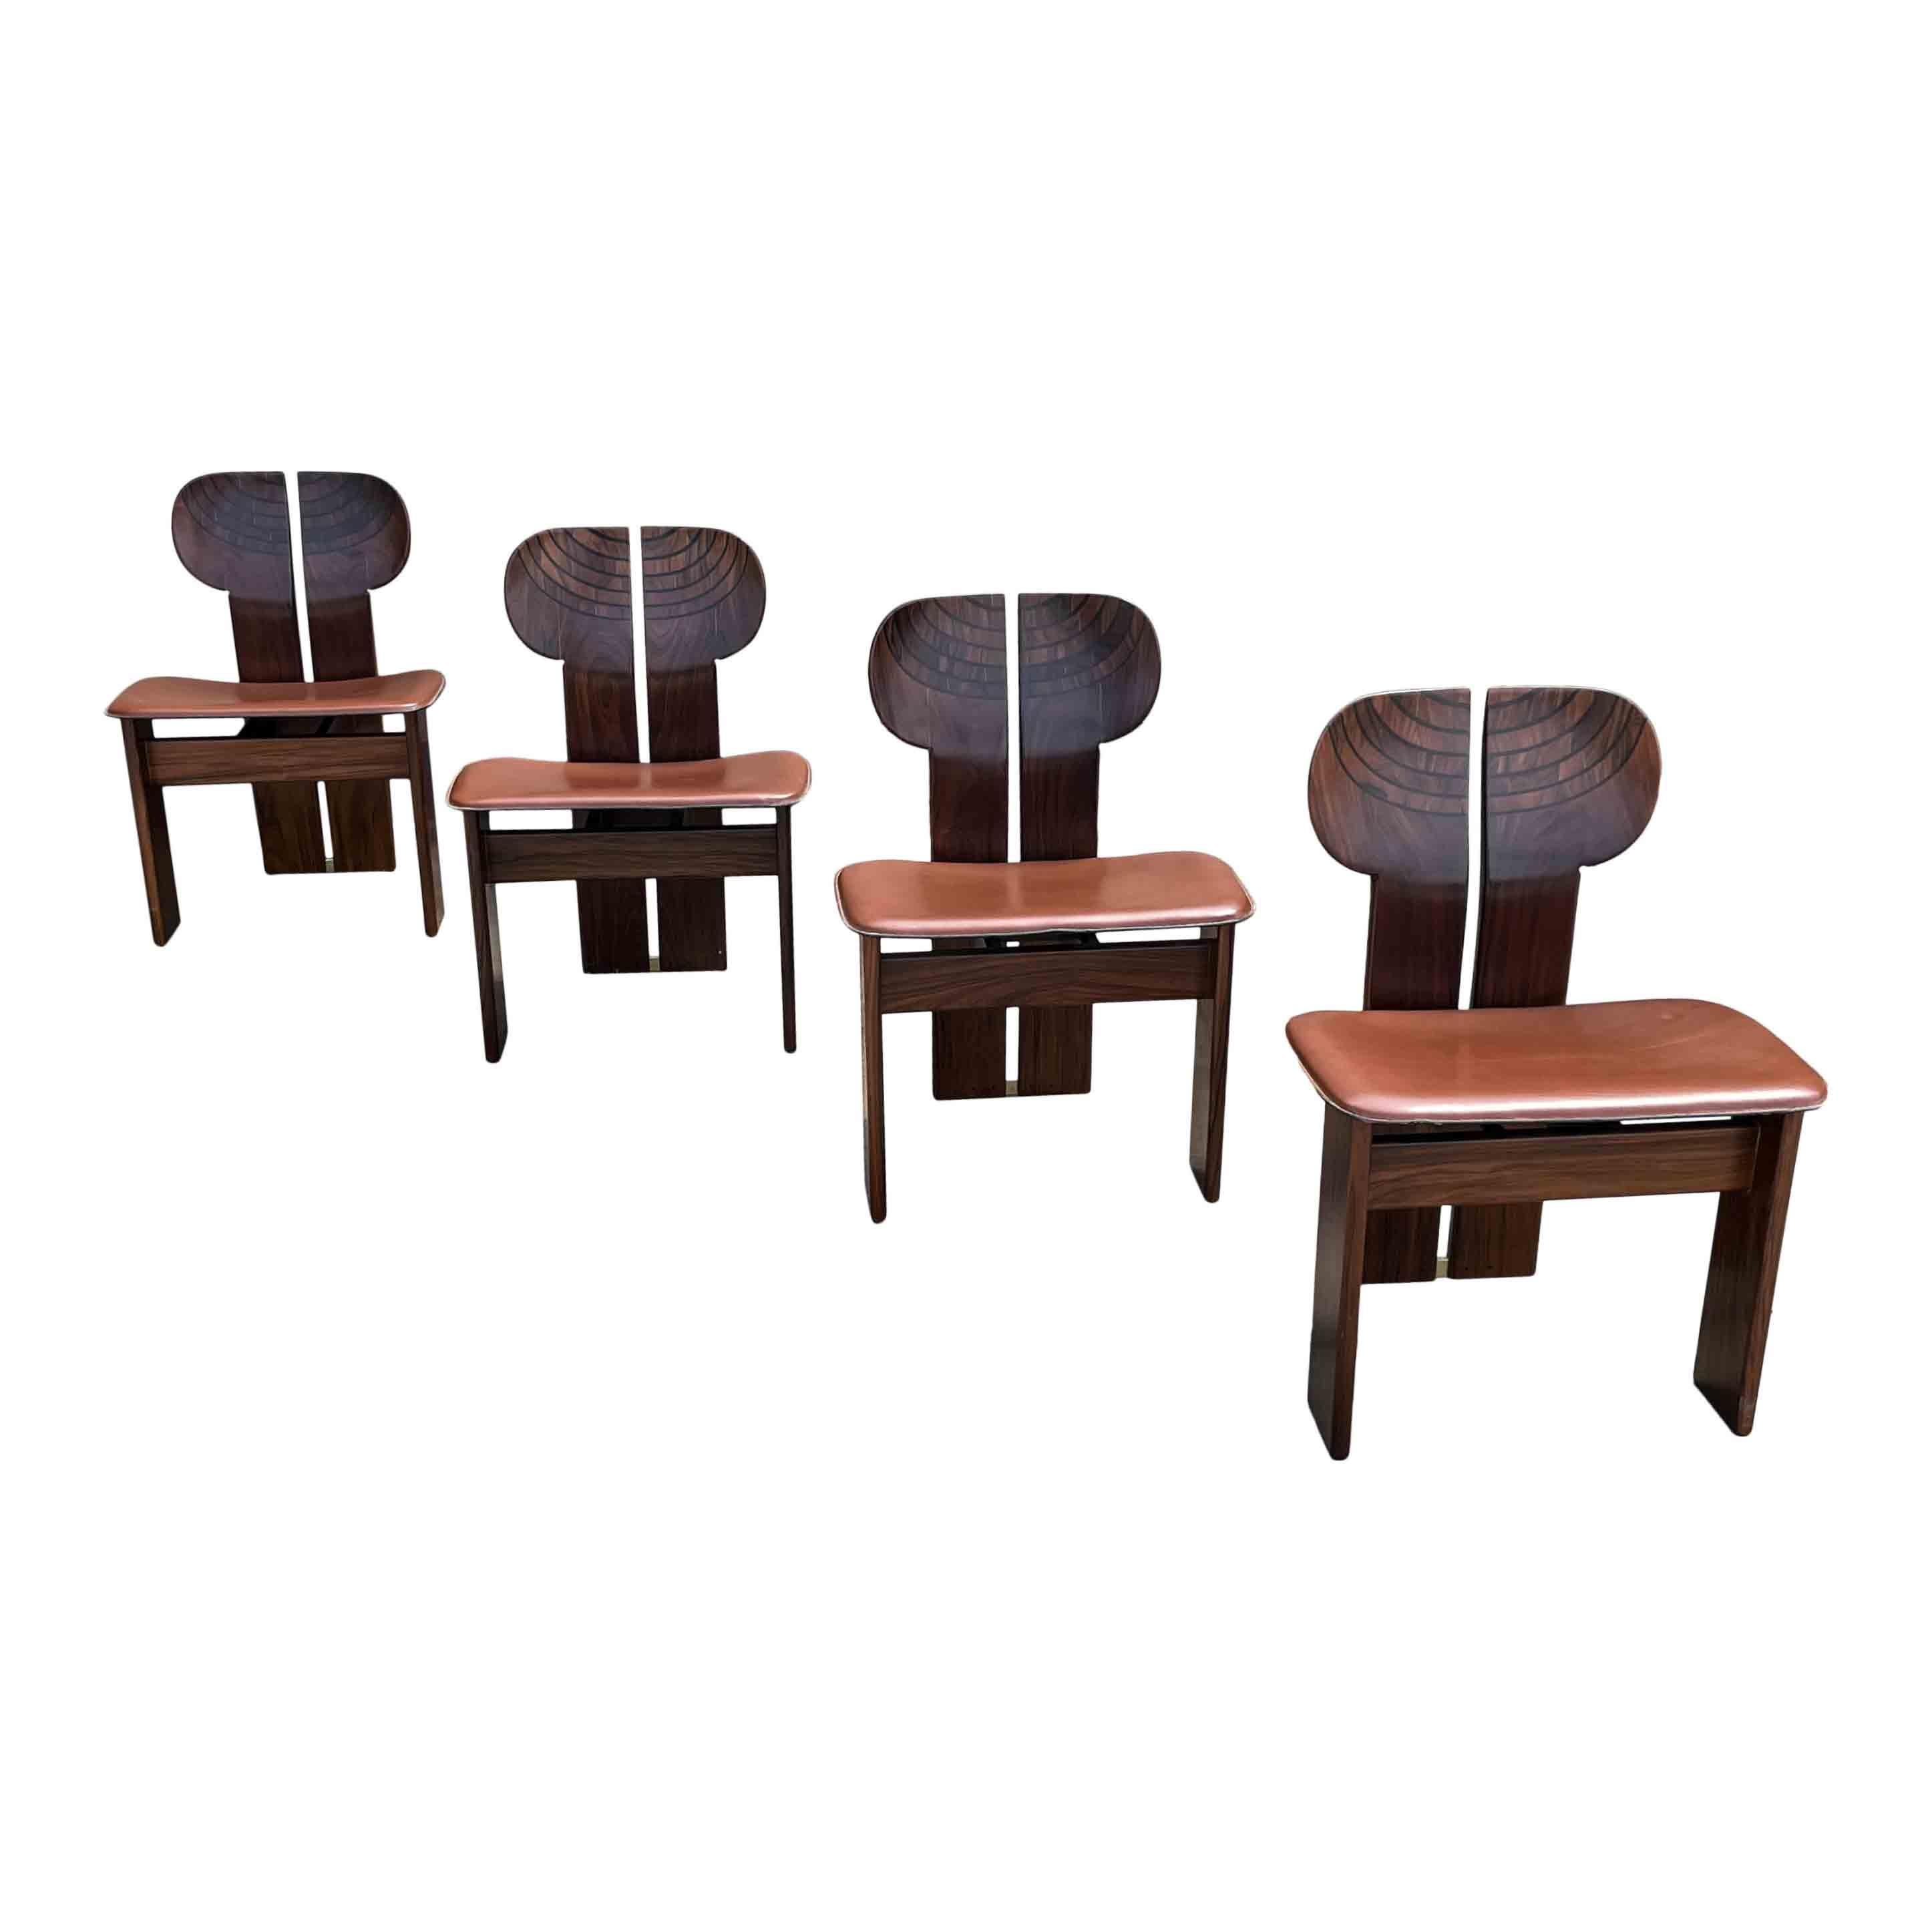 Mid-Century Modern Afra & Tobia Scarpa Africa Dining Room Set for Maxalto, 4 Chairs and Table, 1976 For Sale